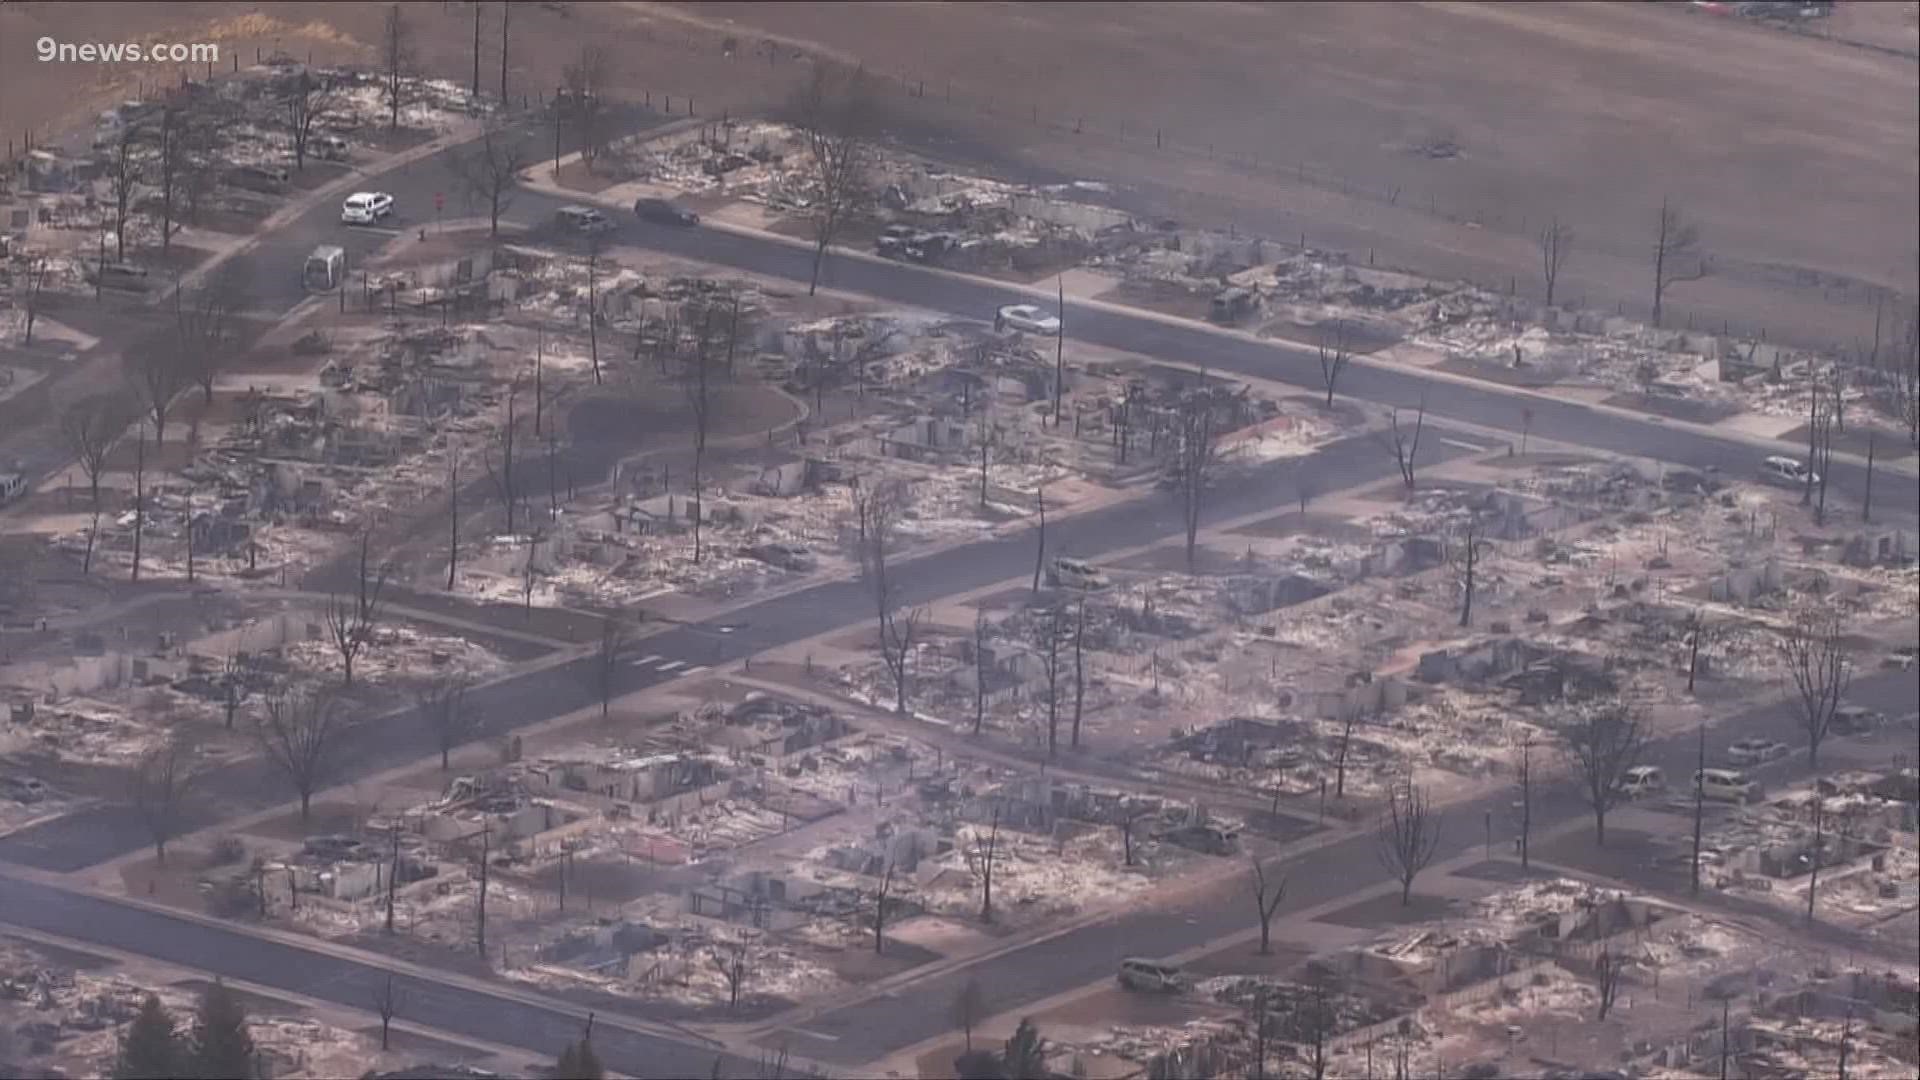 Hundreds of homes have been lost, but there are not any reports of casualties after a devastating wildfire tore through the towns of Superior and Louisville.